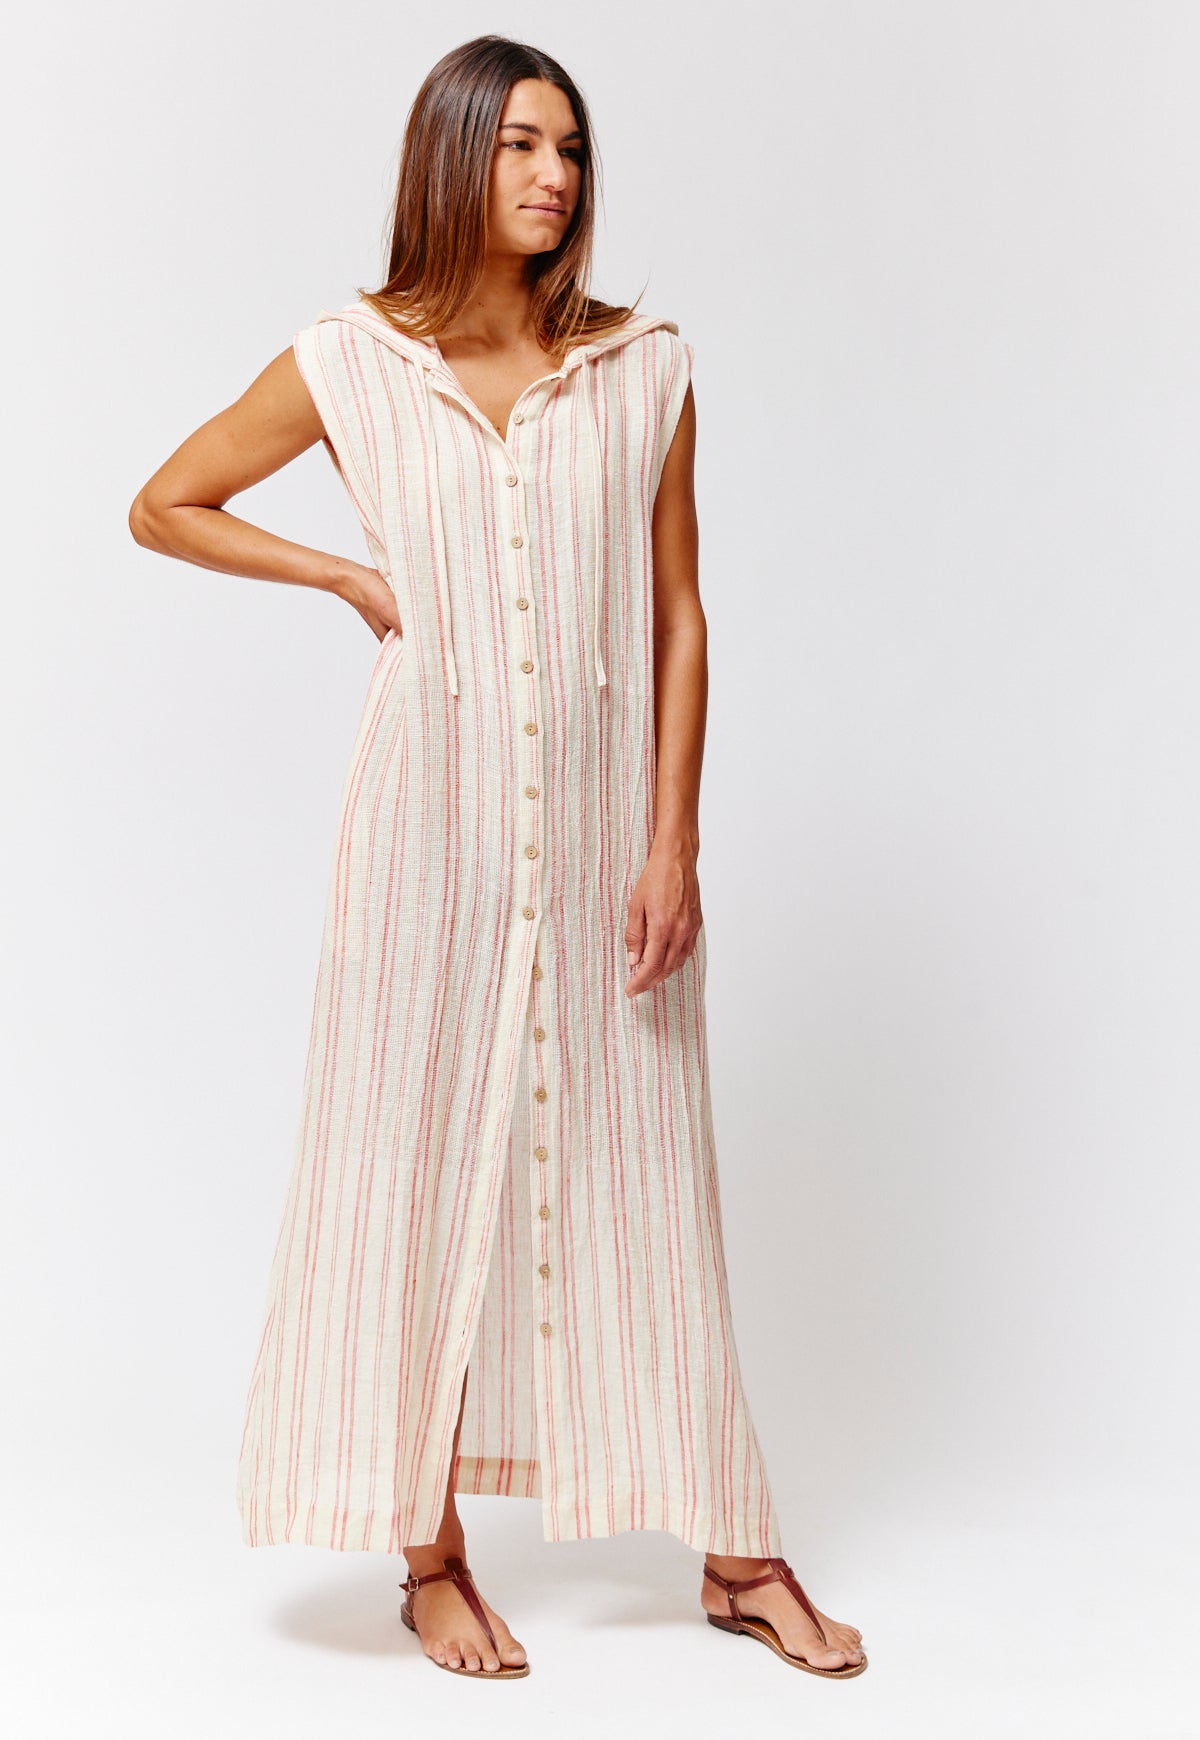 THE CAFTAN SHIRT DRESS in NATURAL & TOMATO CHIOS STRIPED GAUZE